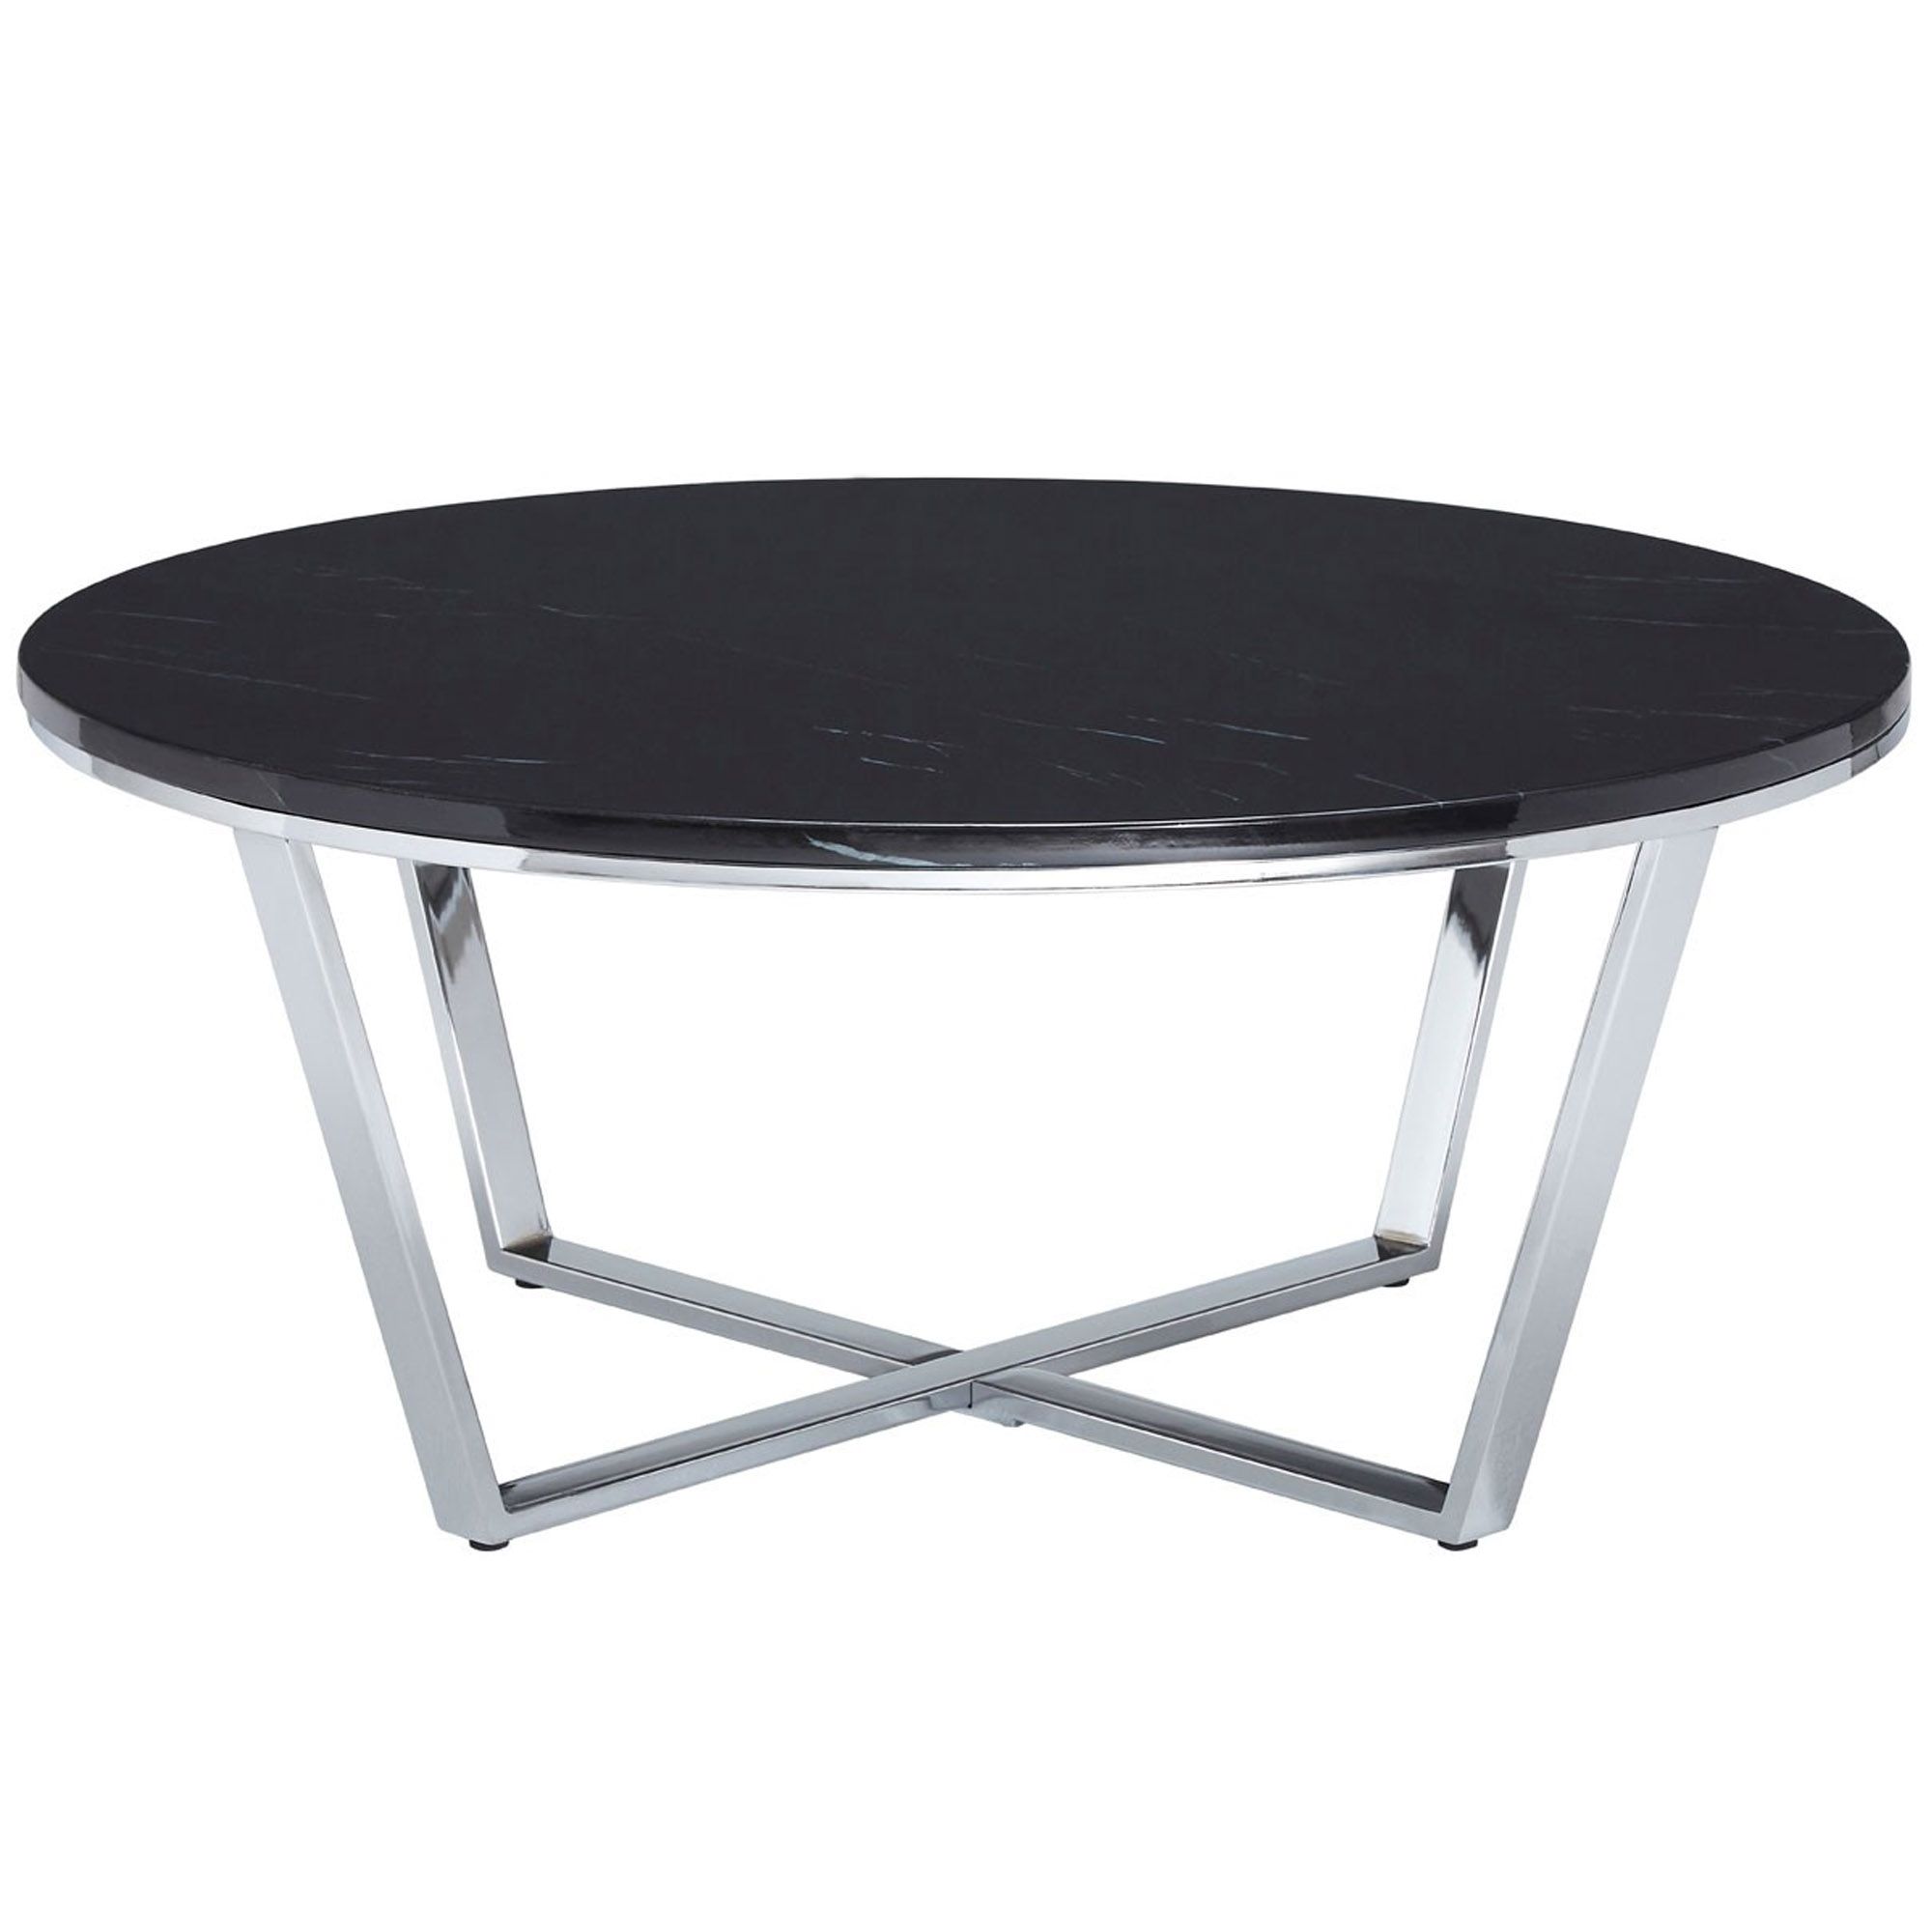 Black Allure Round Coffee Table | Modern & Contemporary Furniture Pertaining To Full Black Round Coffee Tables (Gallery 15 of 20)